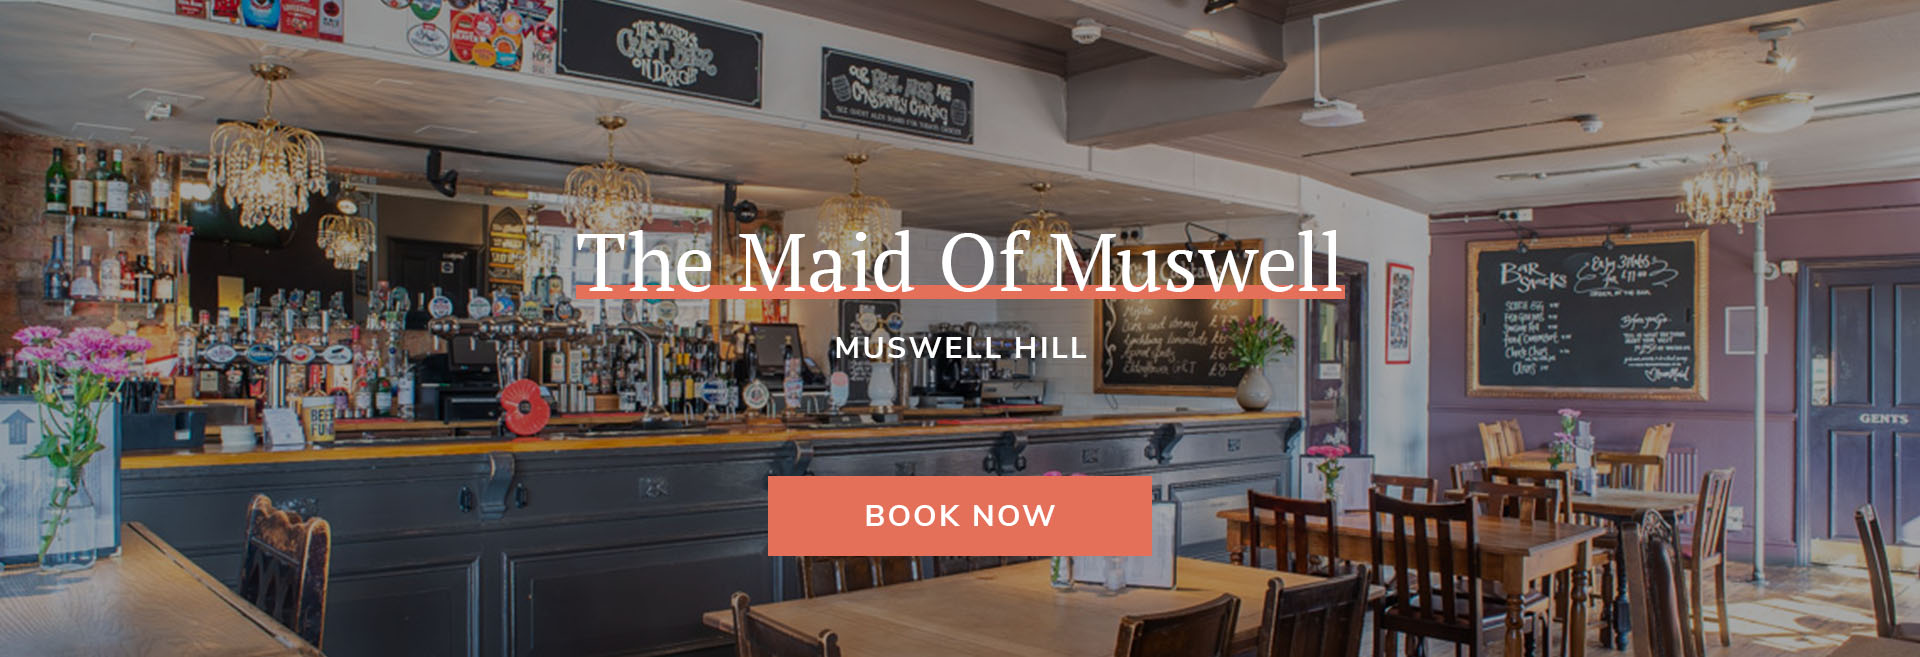 The Maid Of Muswell Banner 2